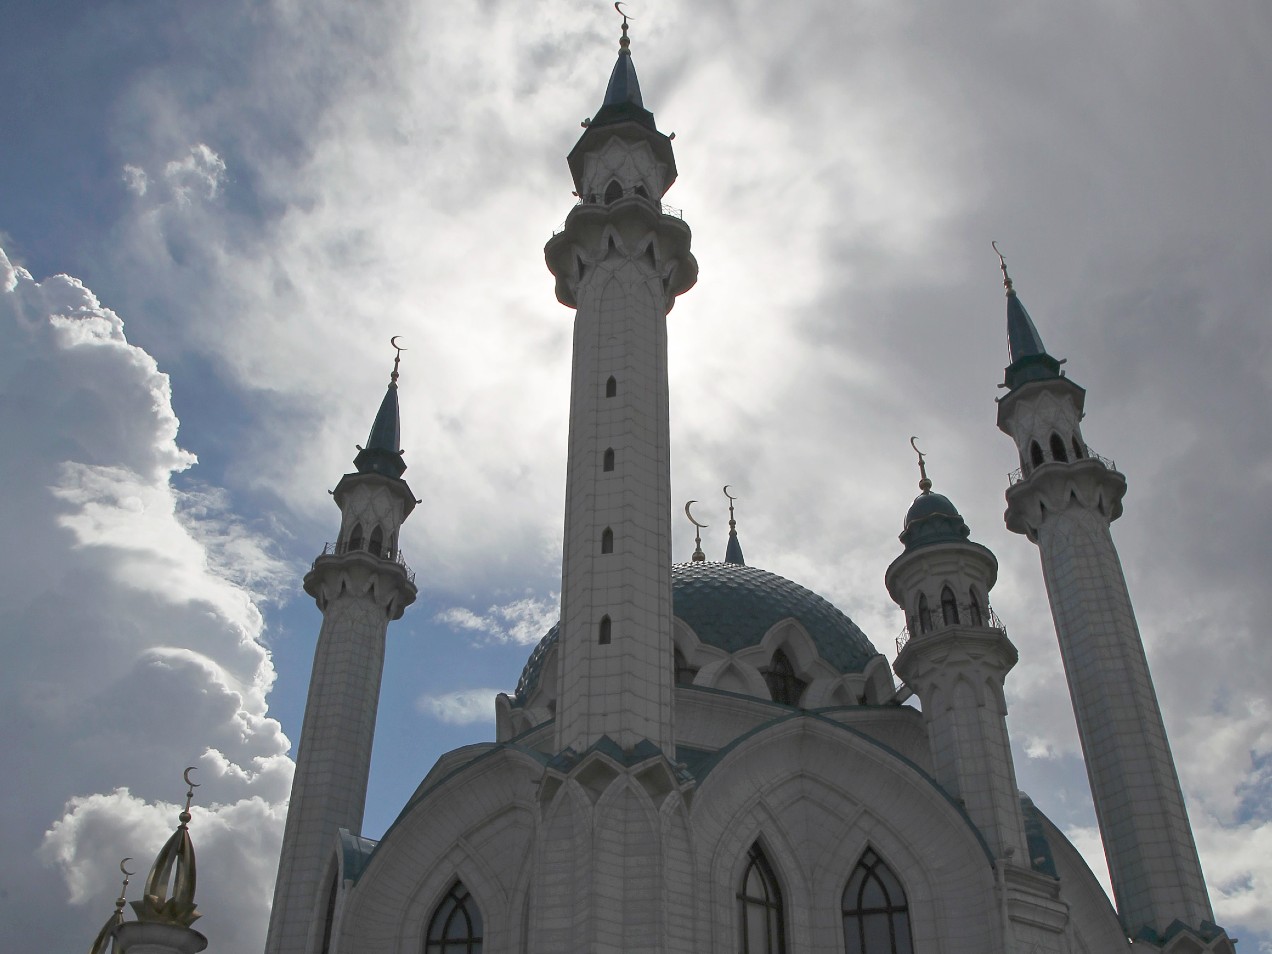 Photo: An exterior view shows Kul Sharif (also known as Qol Sharif) mosque in Kazan, taken on July 21, 2012. Credit: REUTERS.